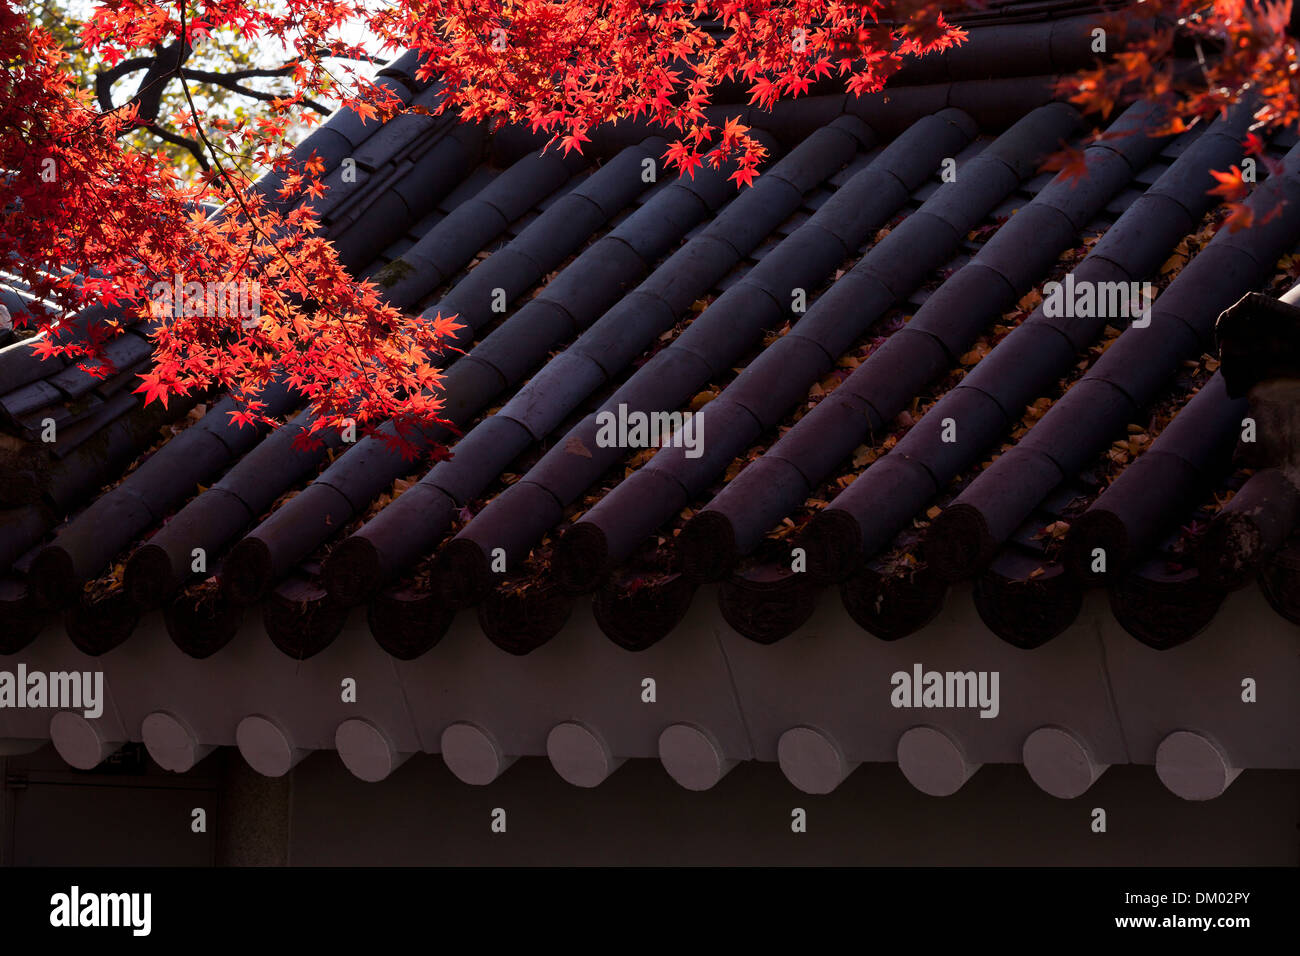 Maple leaves showing autumn colors against traditional clay tile roofing - Seoul, South Korea Stock Photo